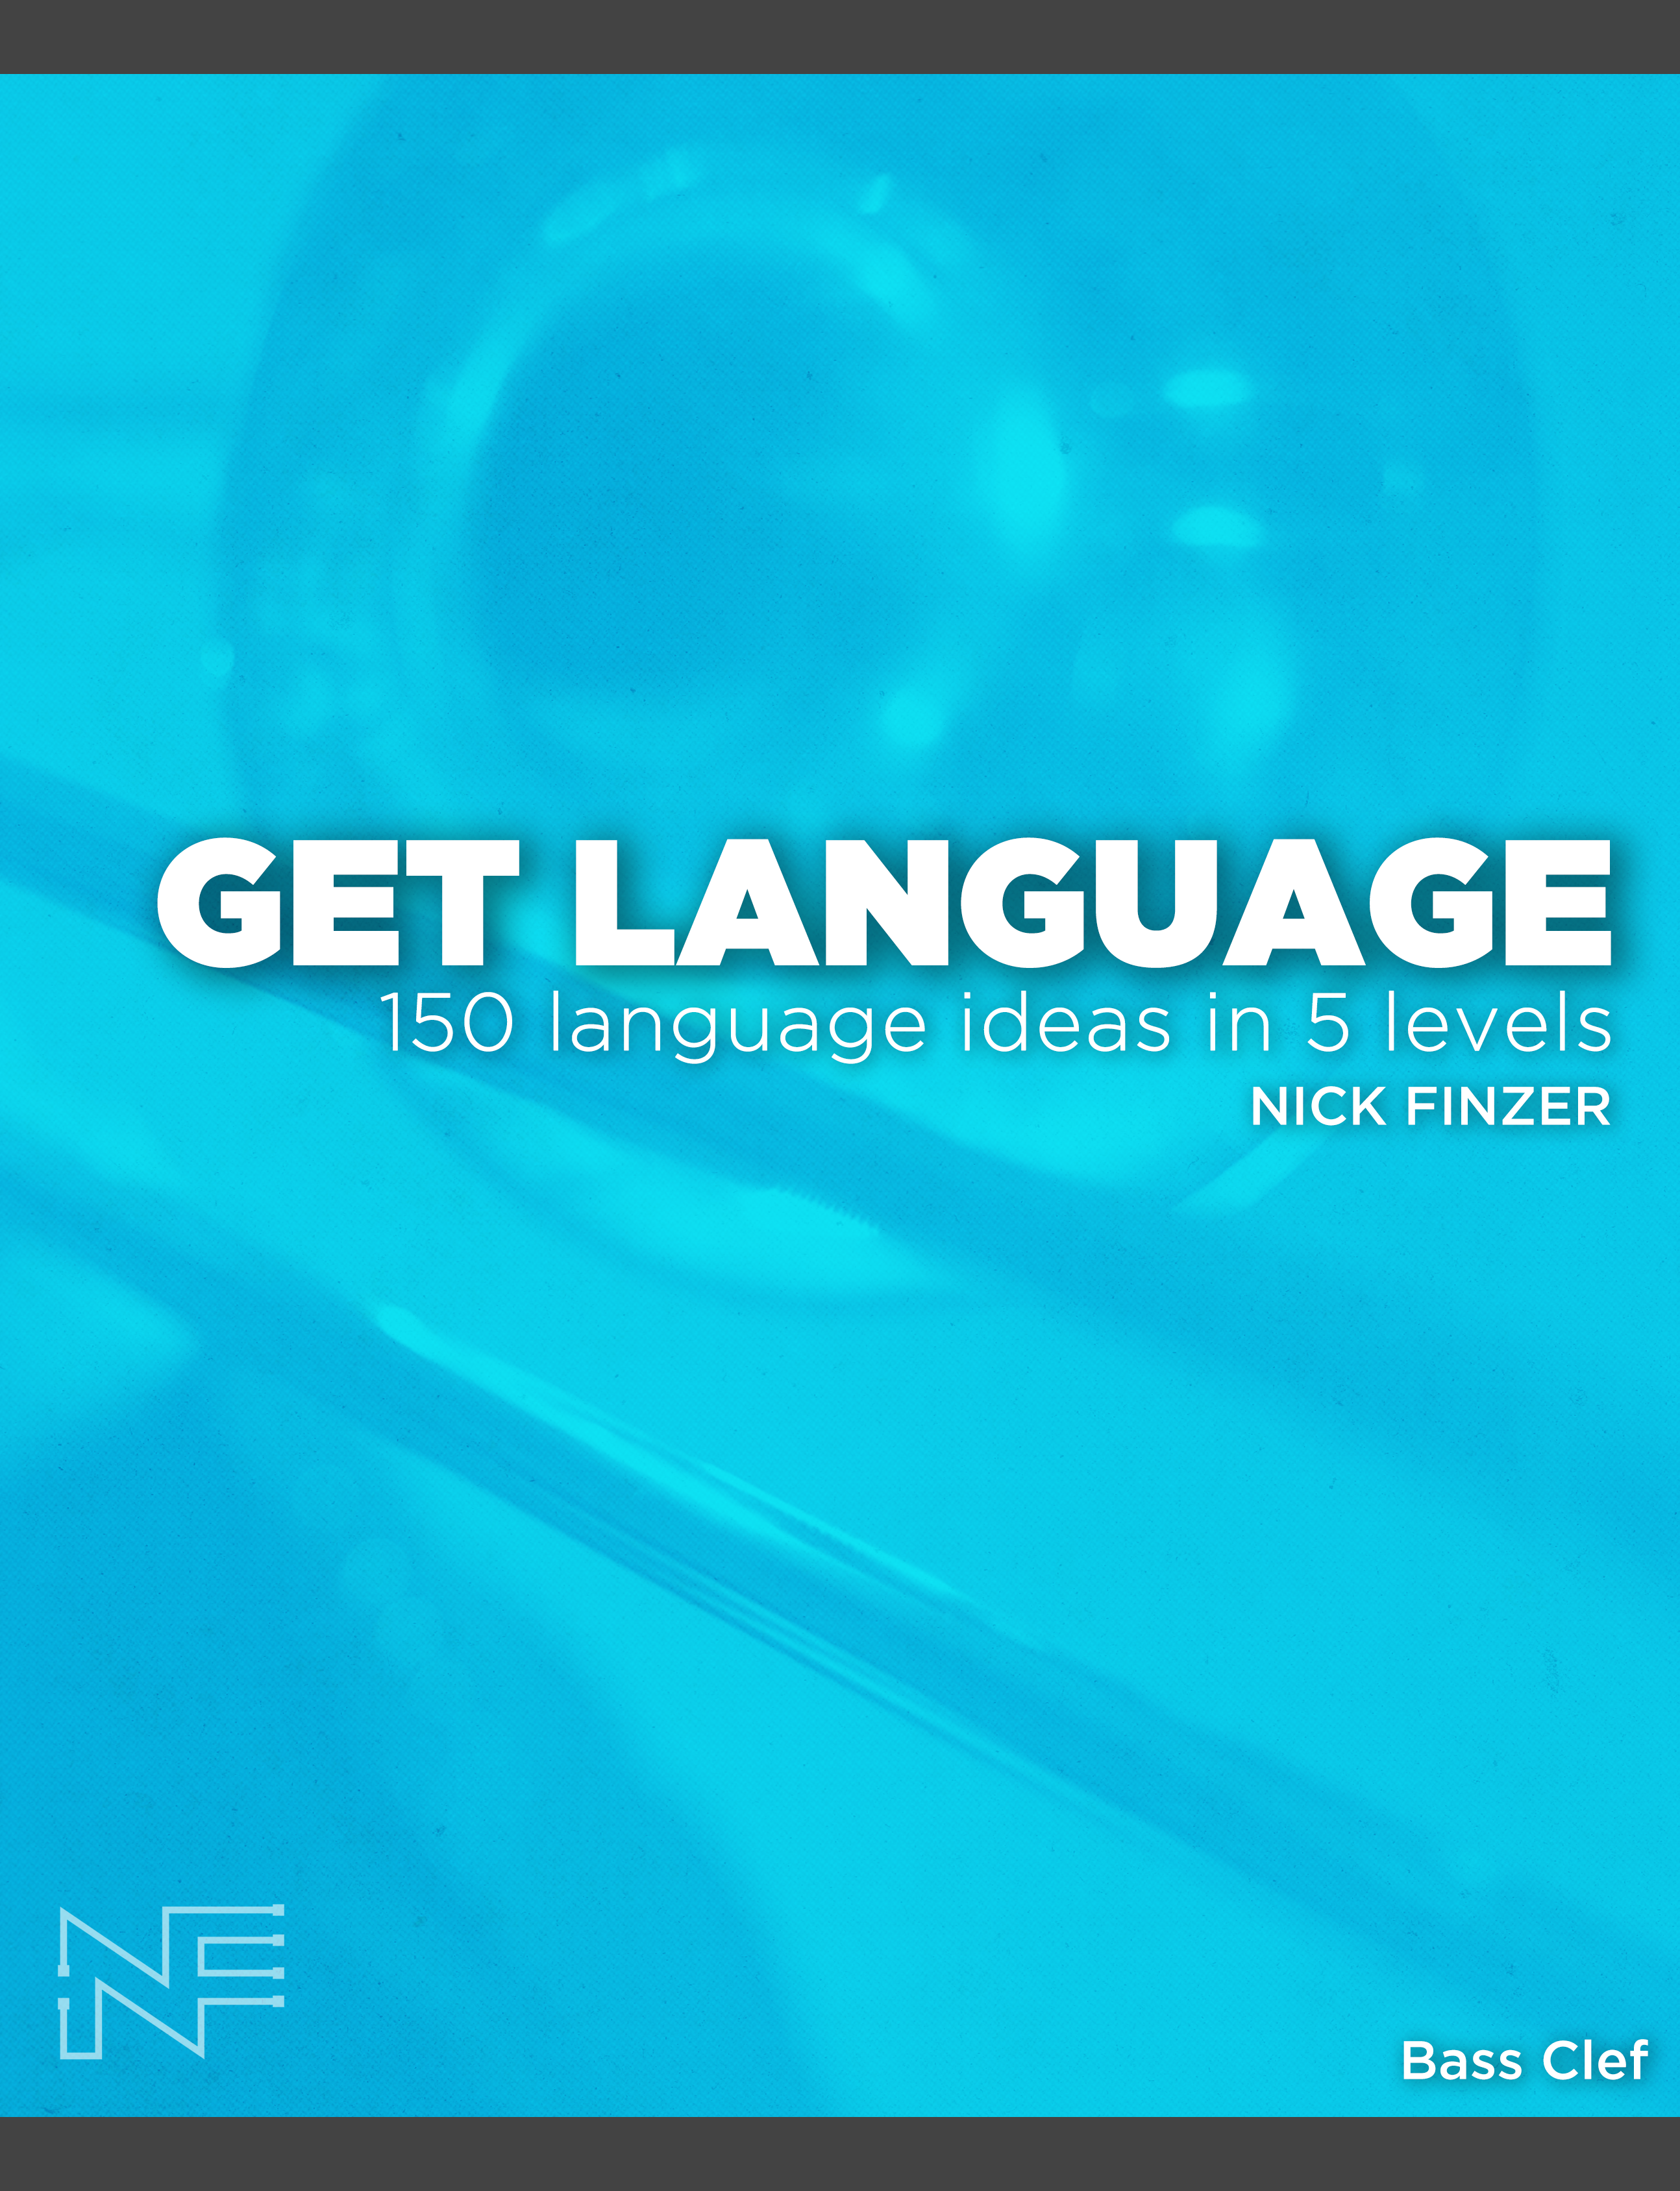 (Treble　OR　in　–　(E-Book!)　GET　Nick　150　LANGUAGE　Levels　Bass　language　ideas　Finzer